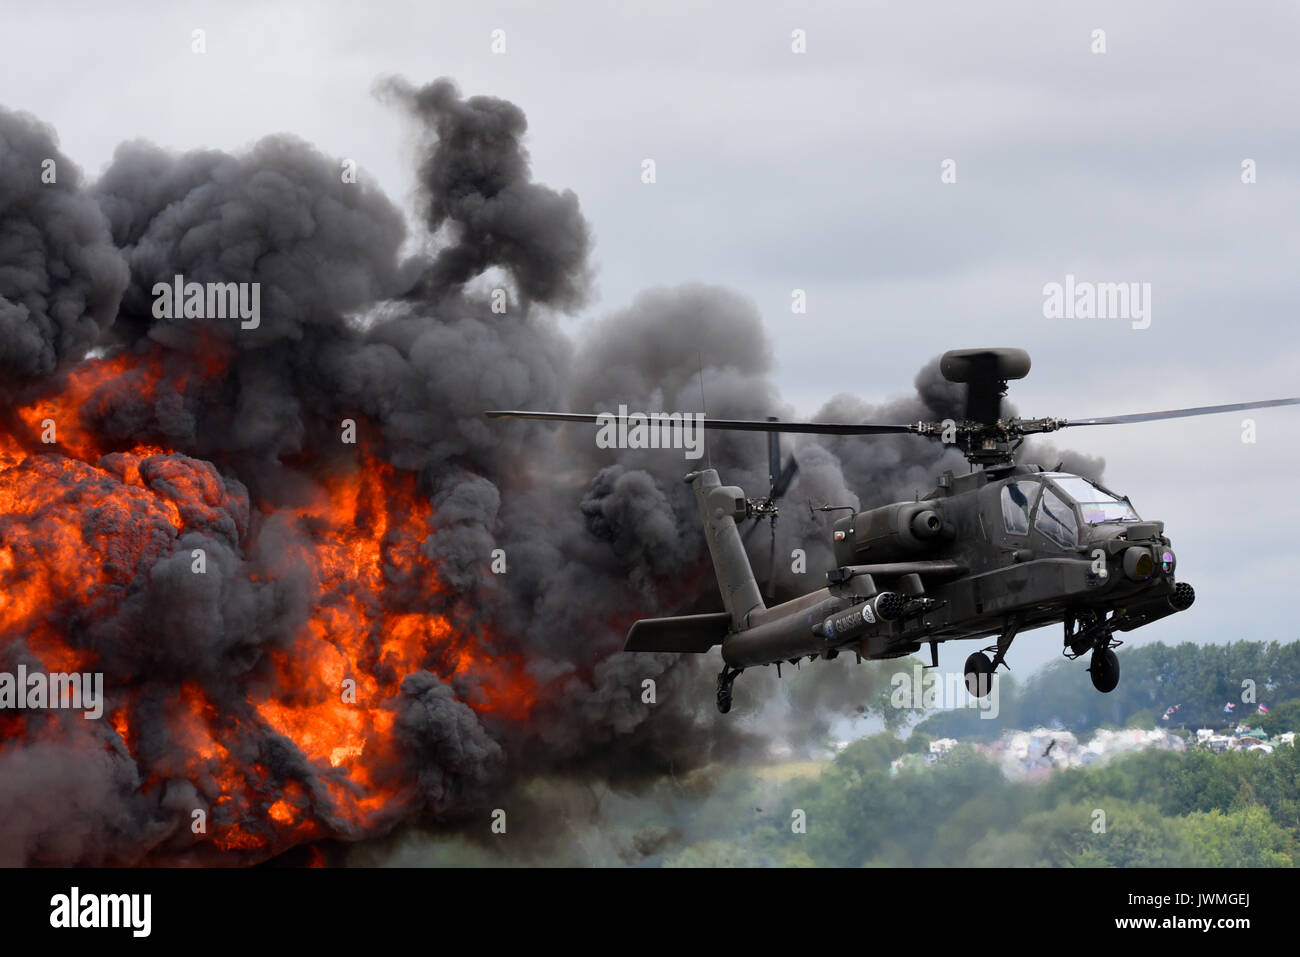 British Army Agusta Westland AH-64 Apache AH1 attack helicopter with exploding pyrotechnics at RIAT airshow Stock Photo